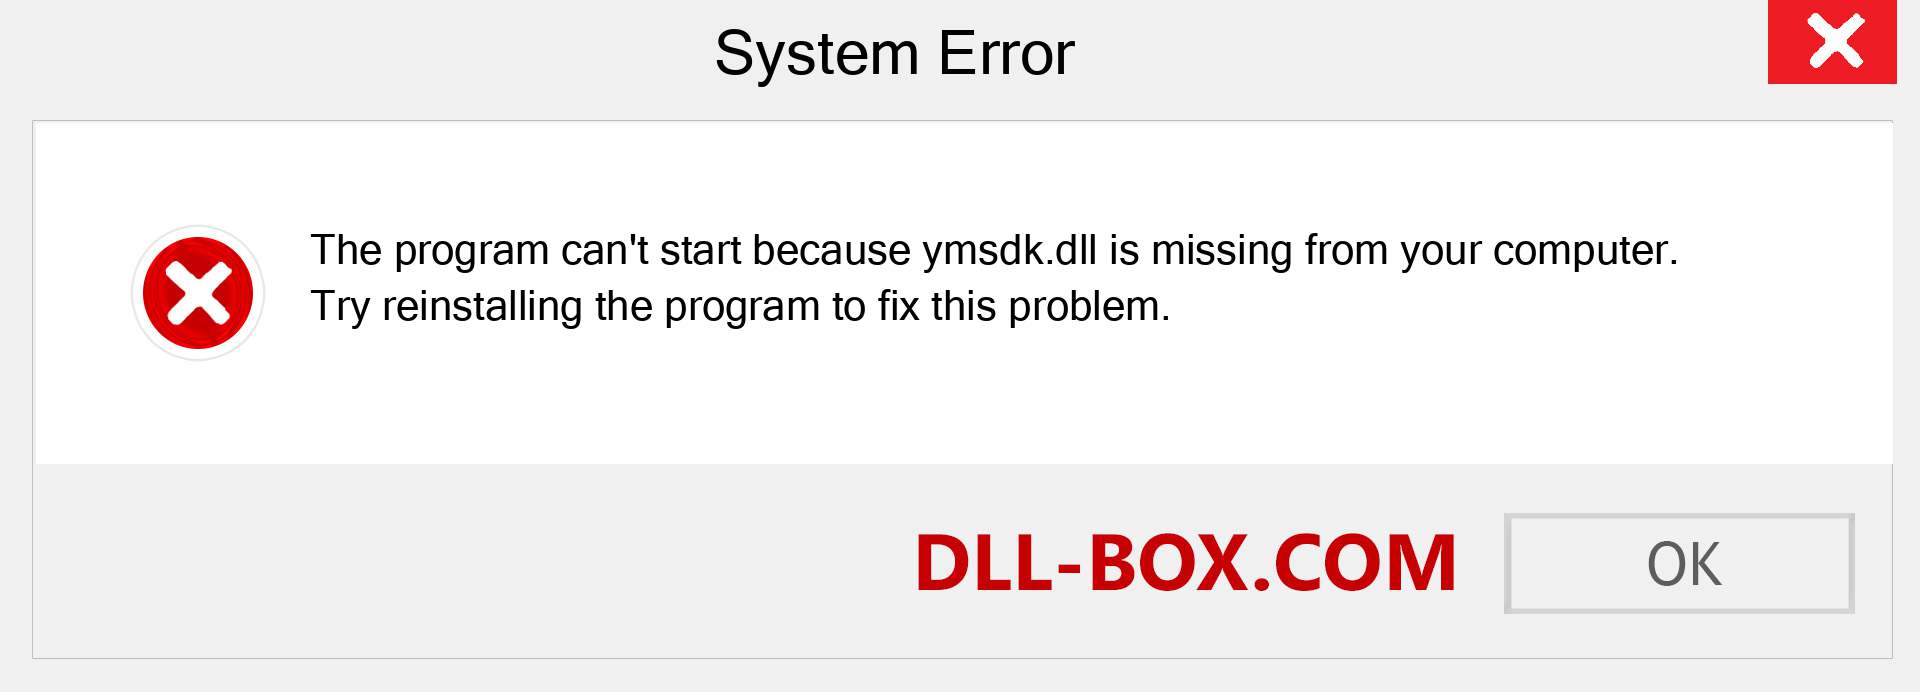  ymsdk.dll file is missing?. Download for Windows 7, 8, 10 - Fix  ymsdk dll Missing Error on Windows, photos, images